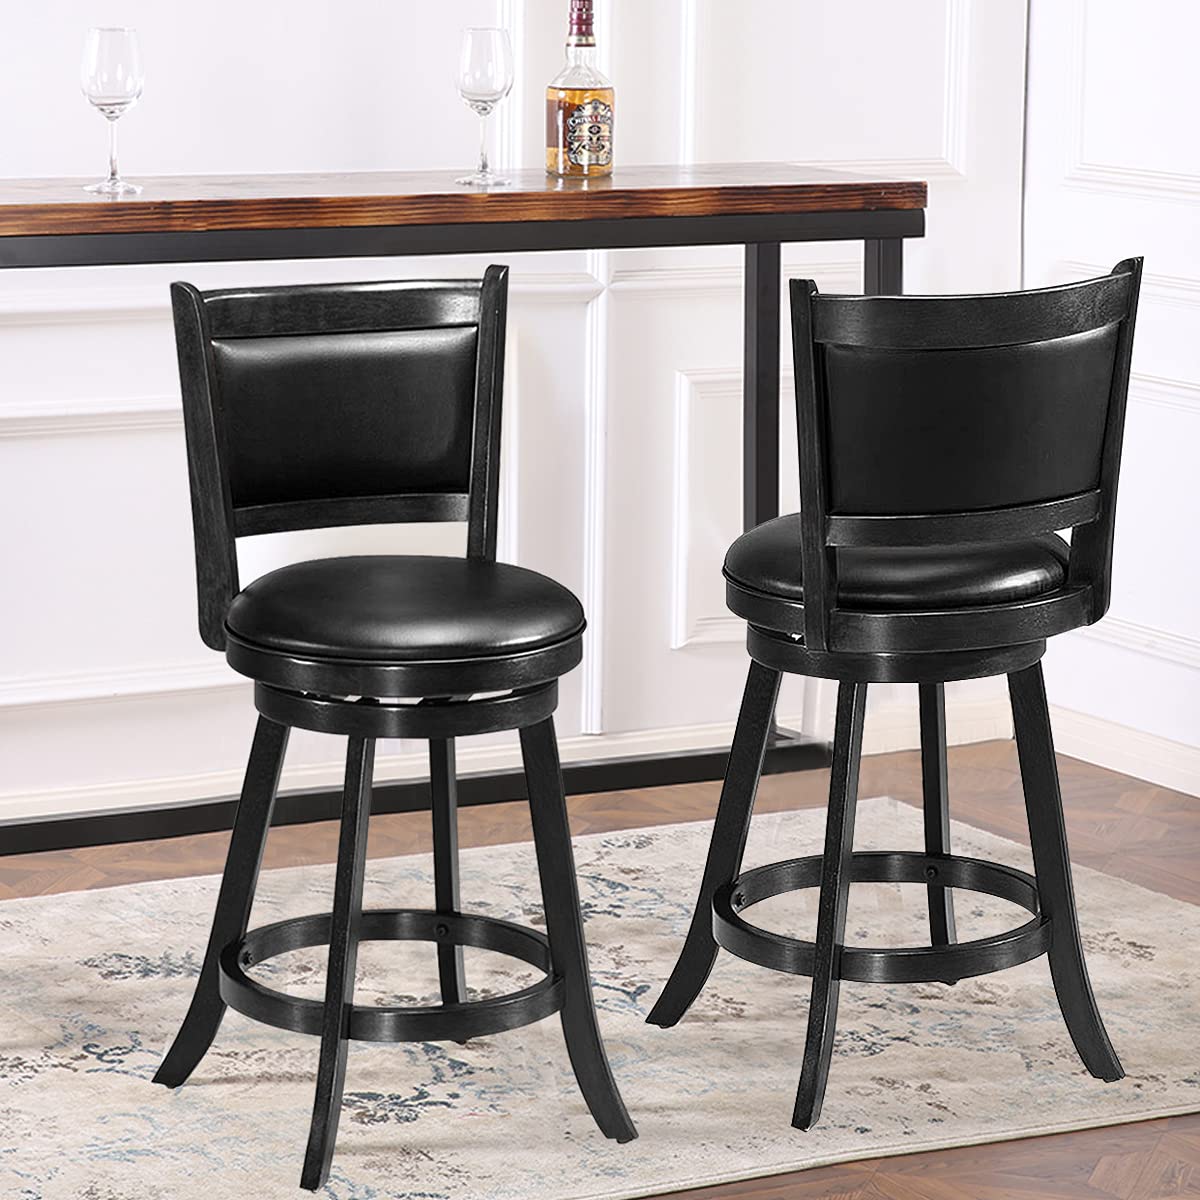 Giantex Accent Wooden Swivel Back Counter Height Bar Stool, Fabric Upholstered Design